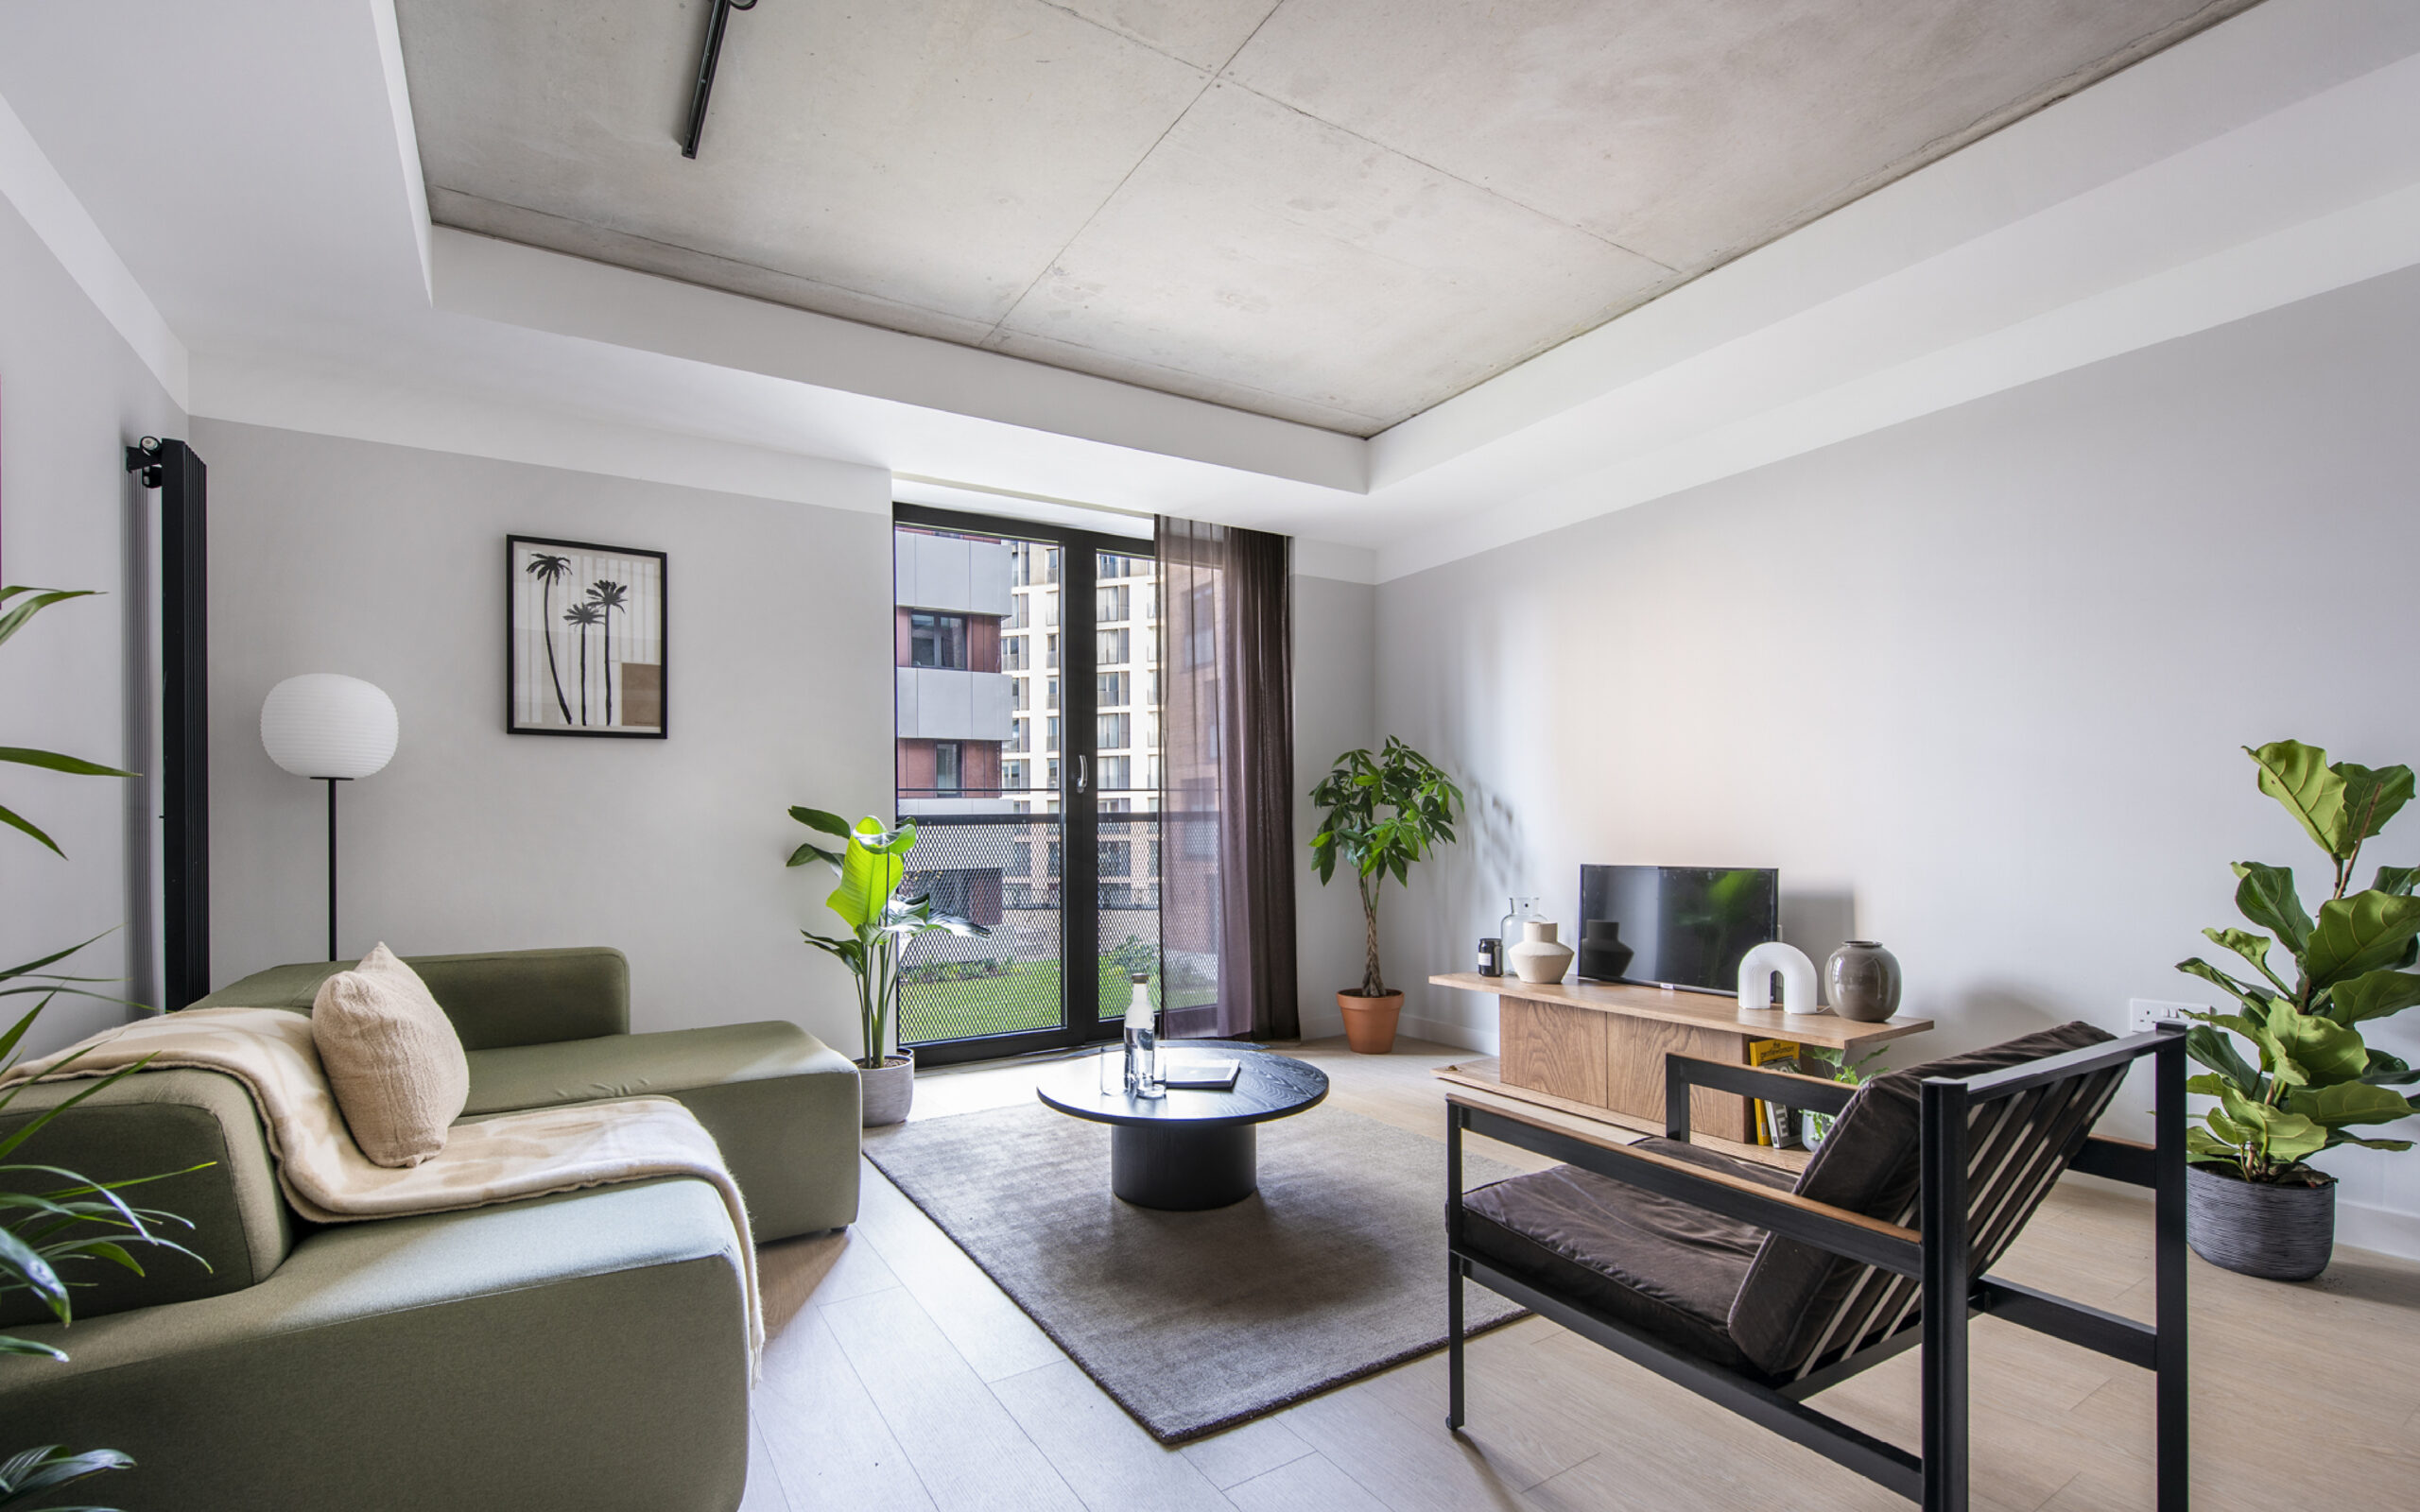 Very modern and minimalist living space in South Block Apartments in Manchester.